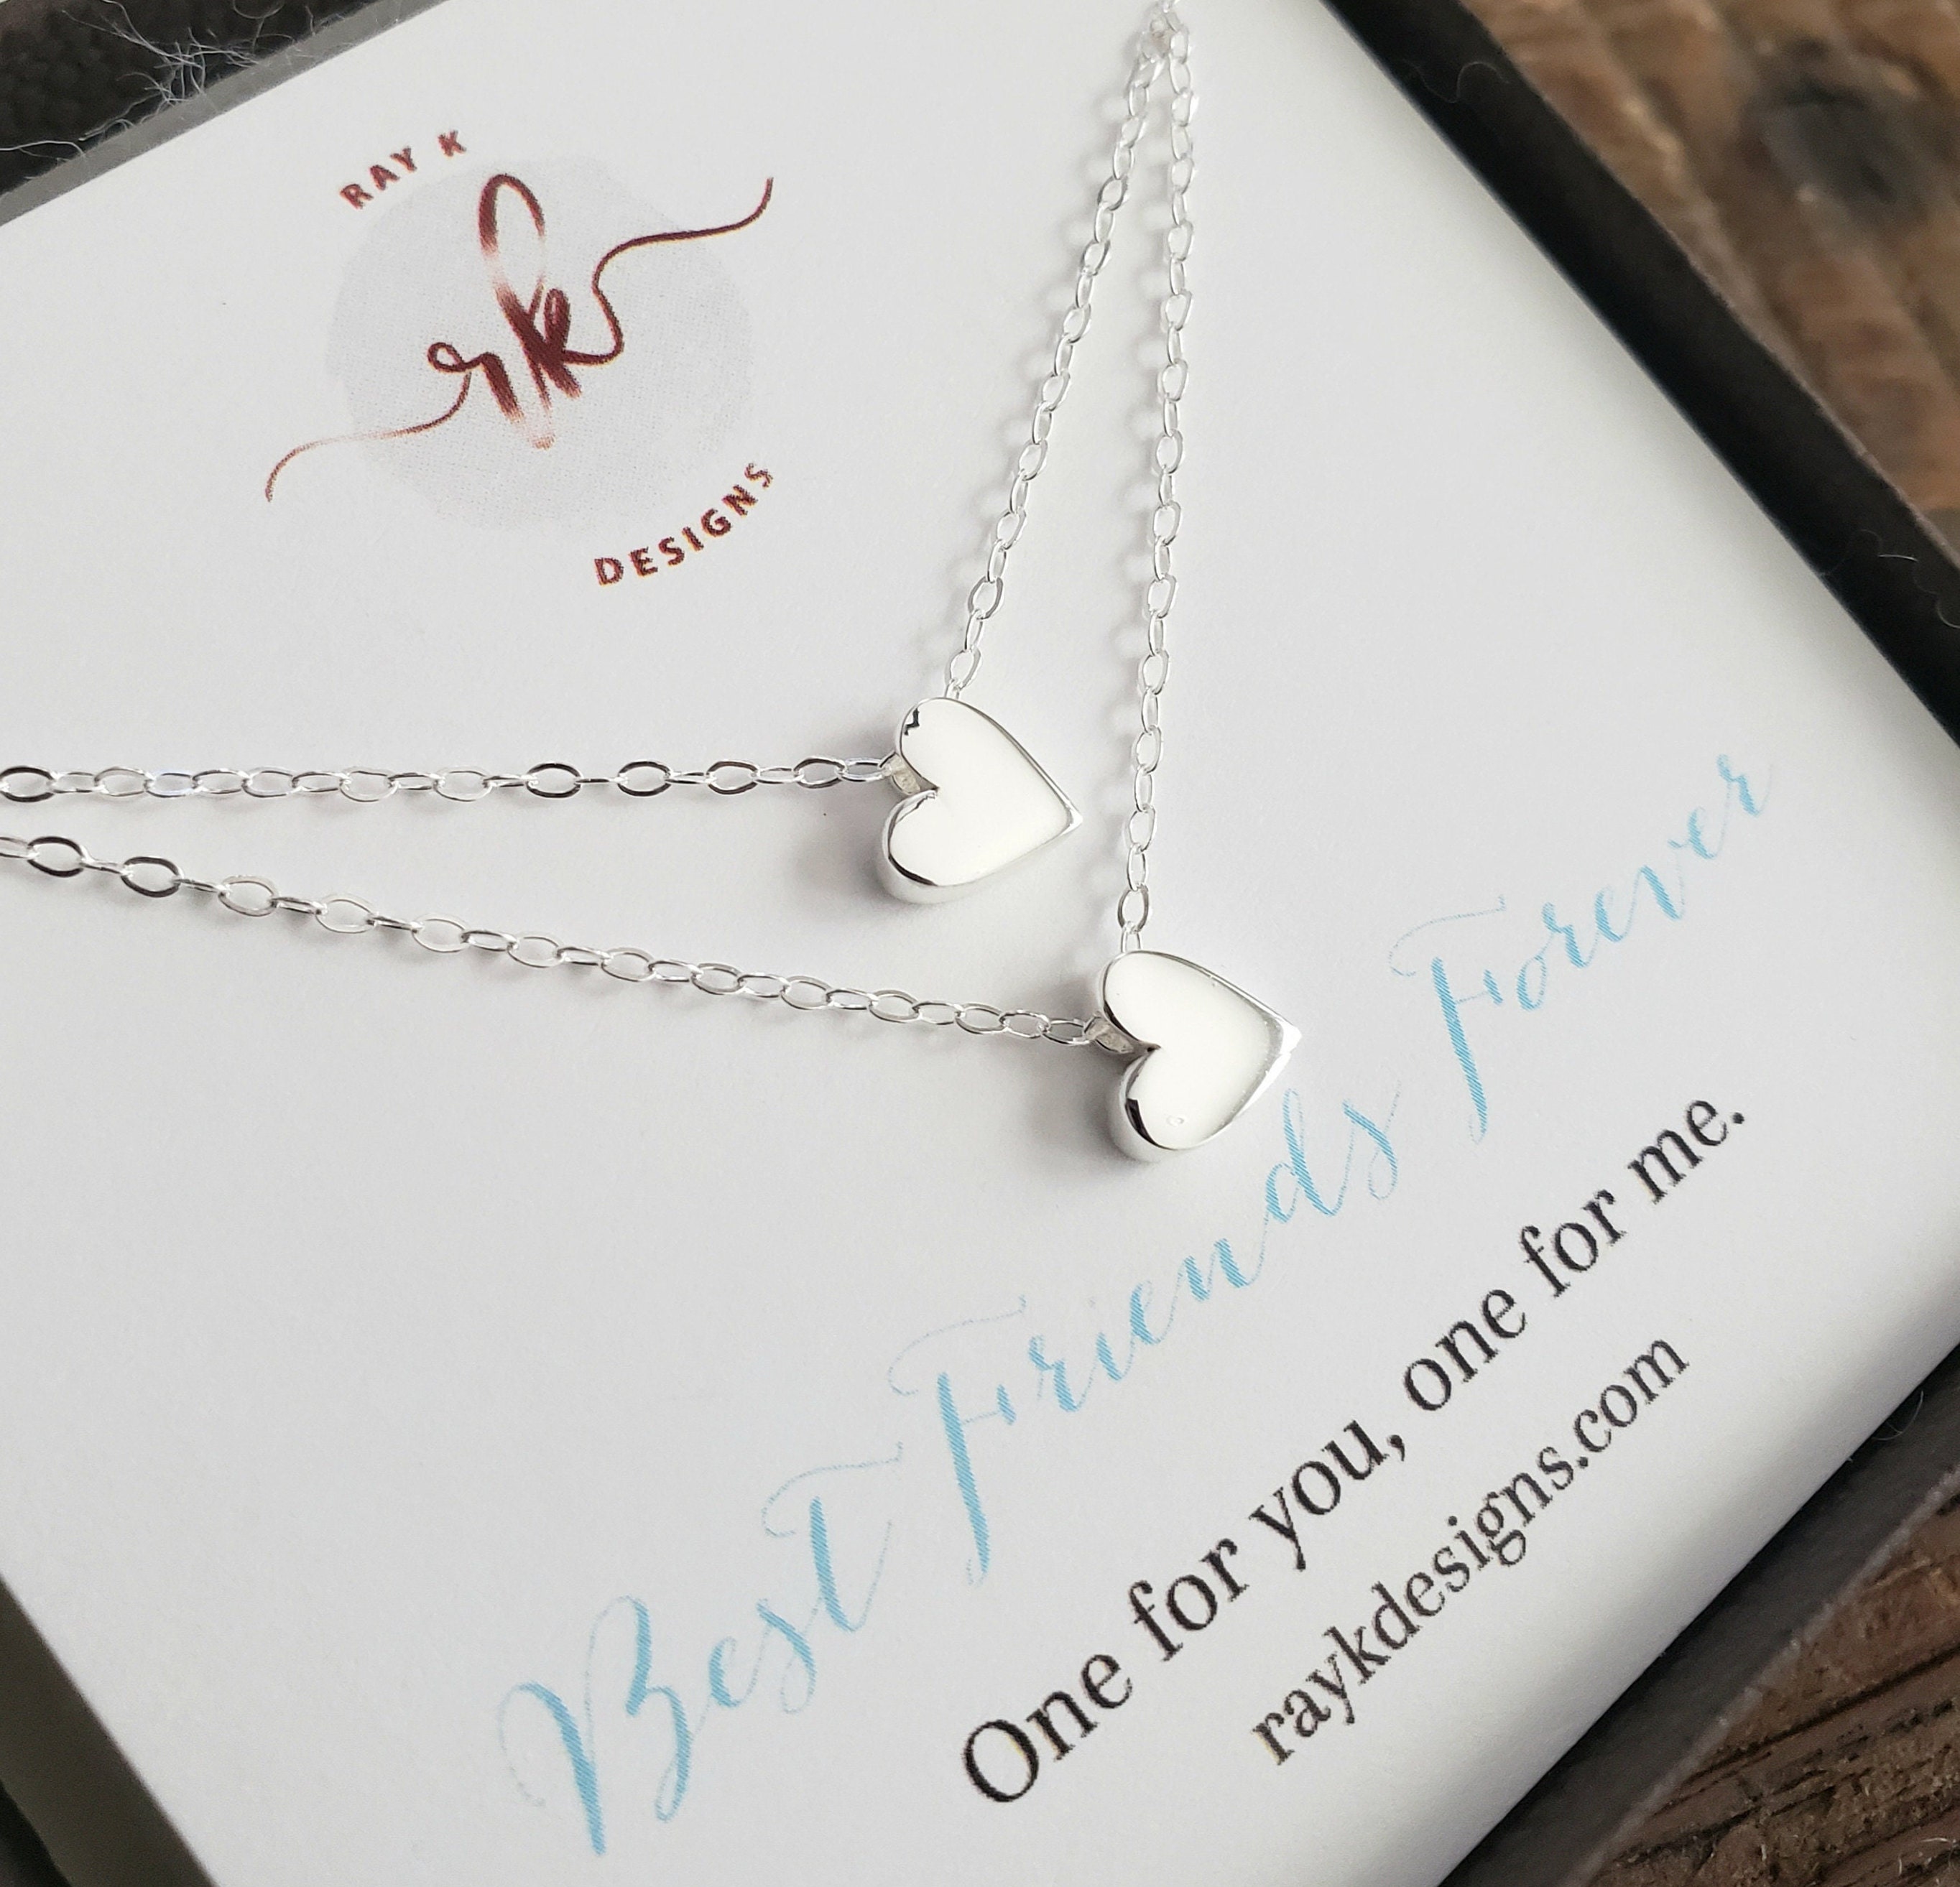 Best Friend Christmas Gift, Small Heart Necklace for Two Girls Friendship Shareable Set, One for You One for Me Tween Birthday Long Distance